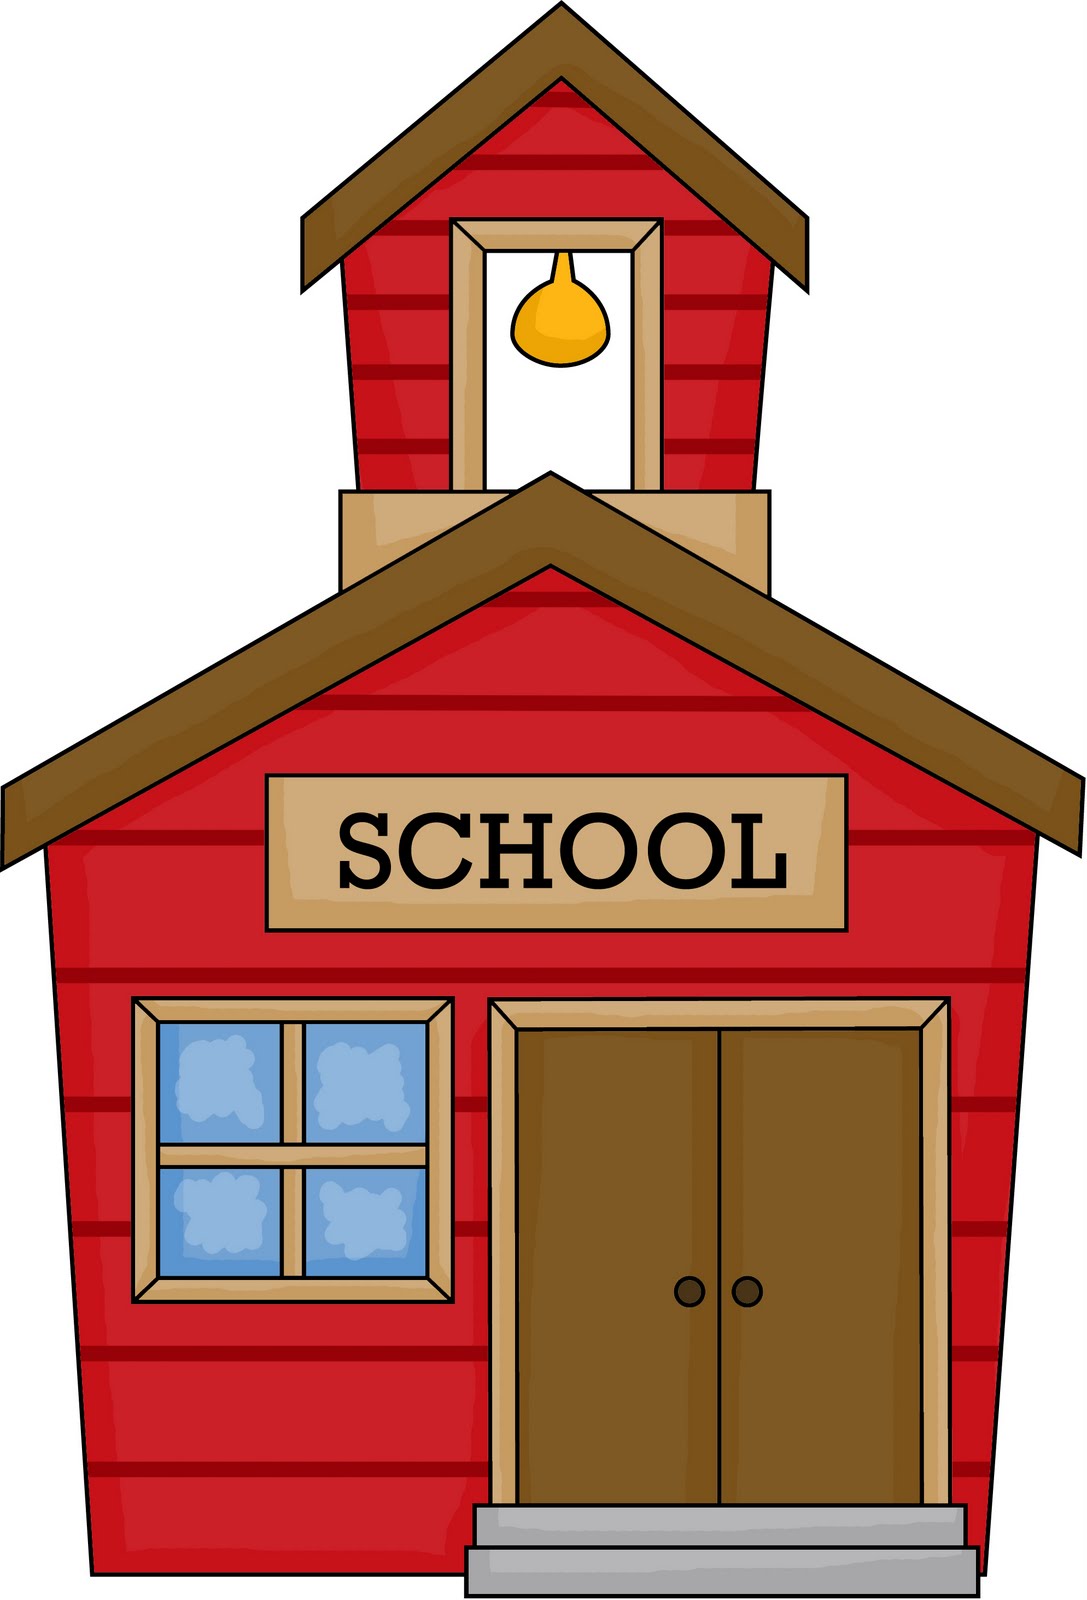 Welcome back to school schoolhouse clipart